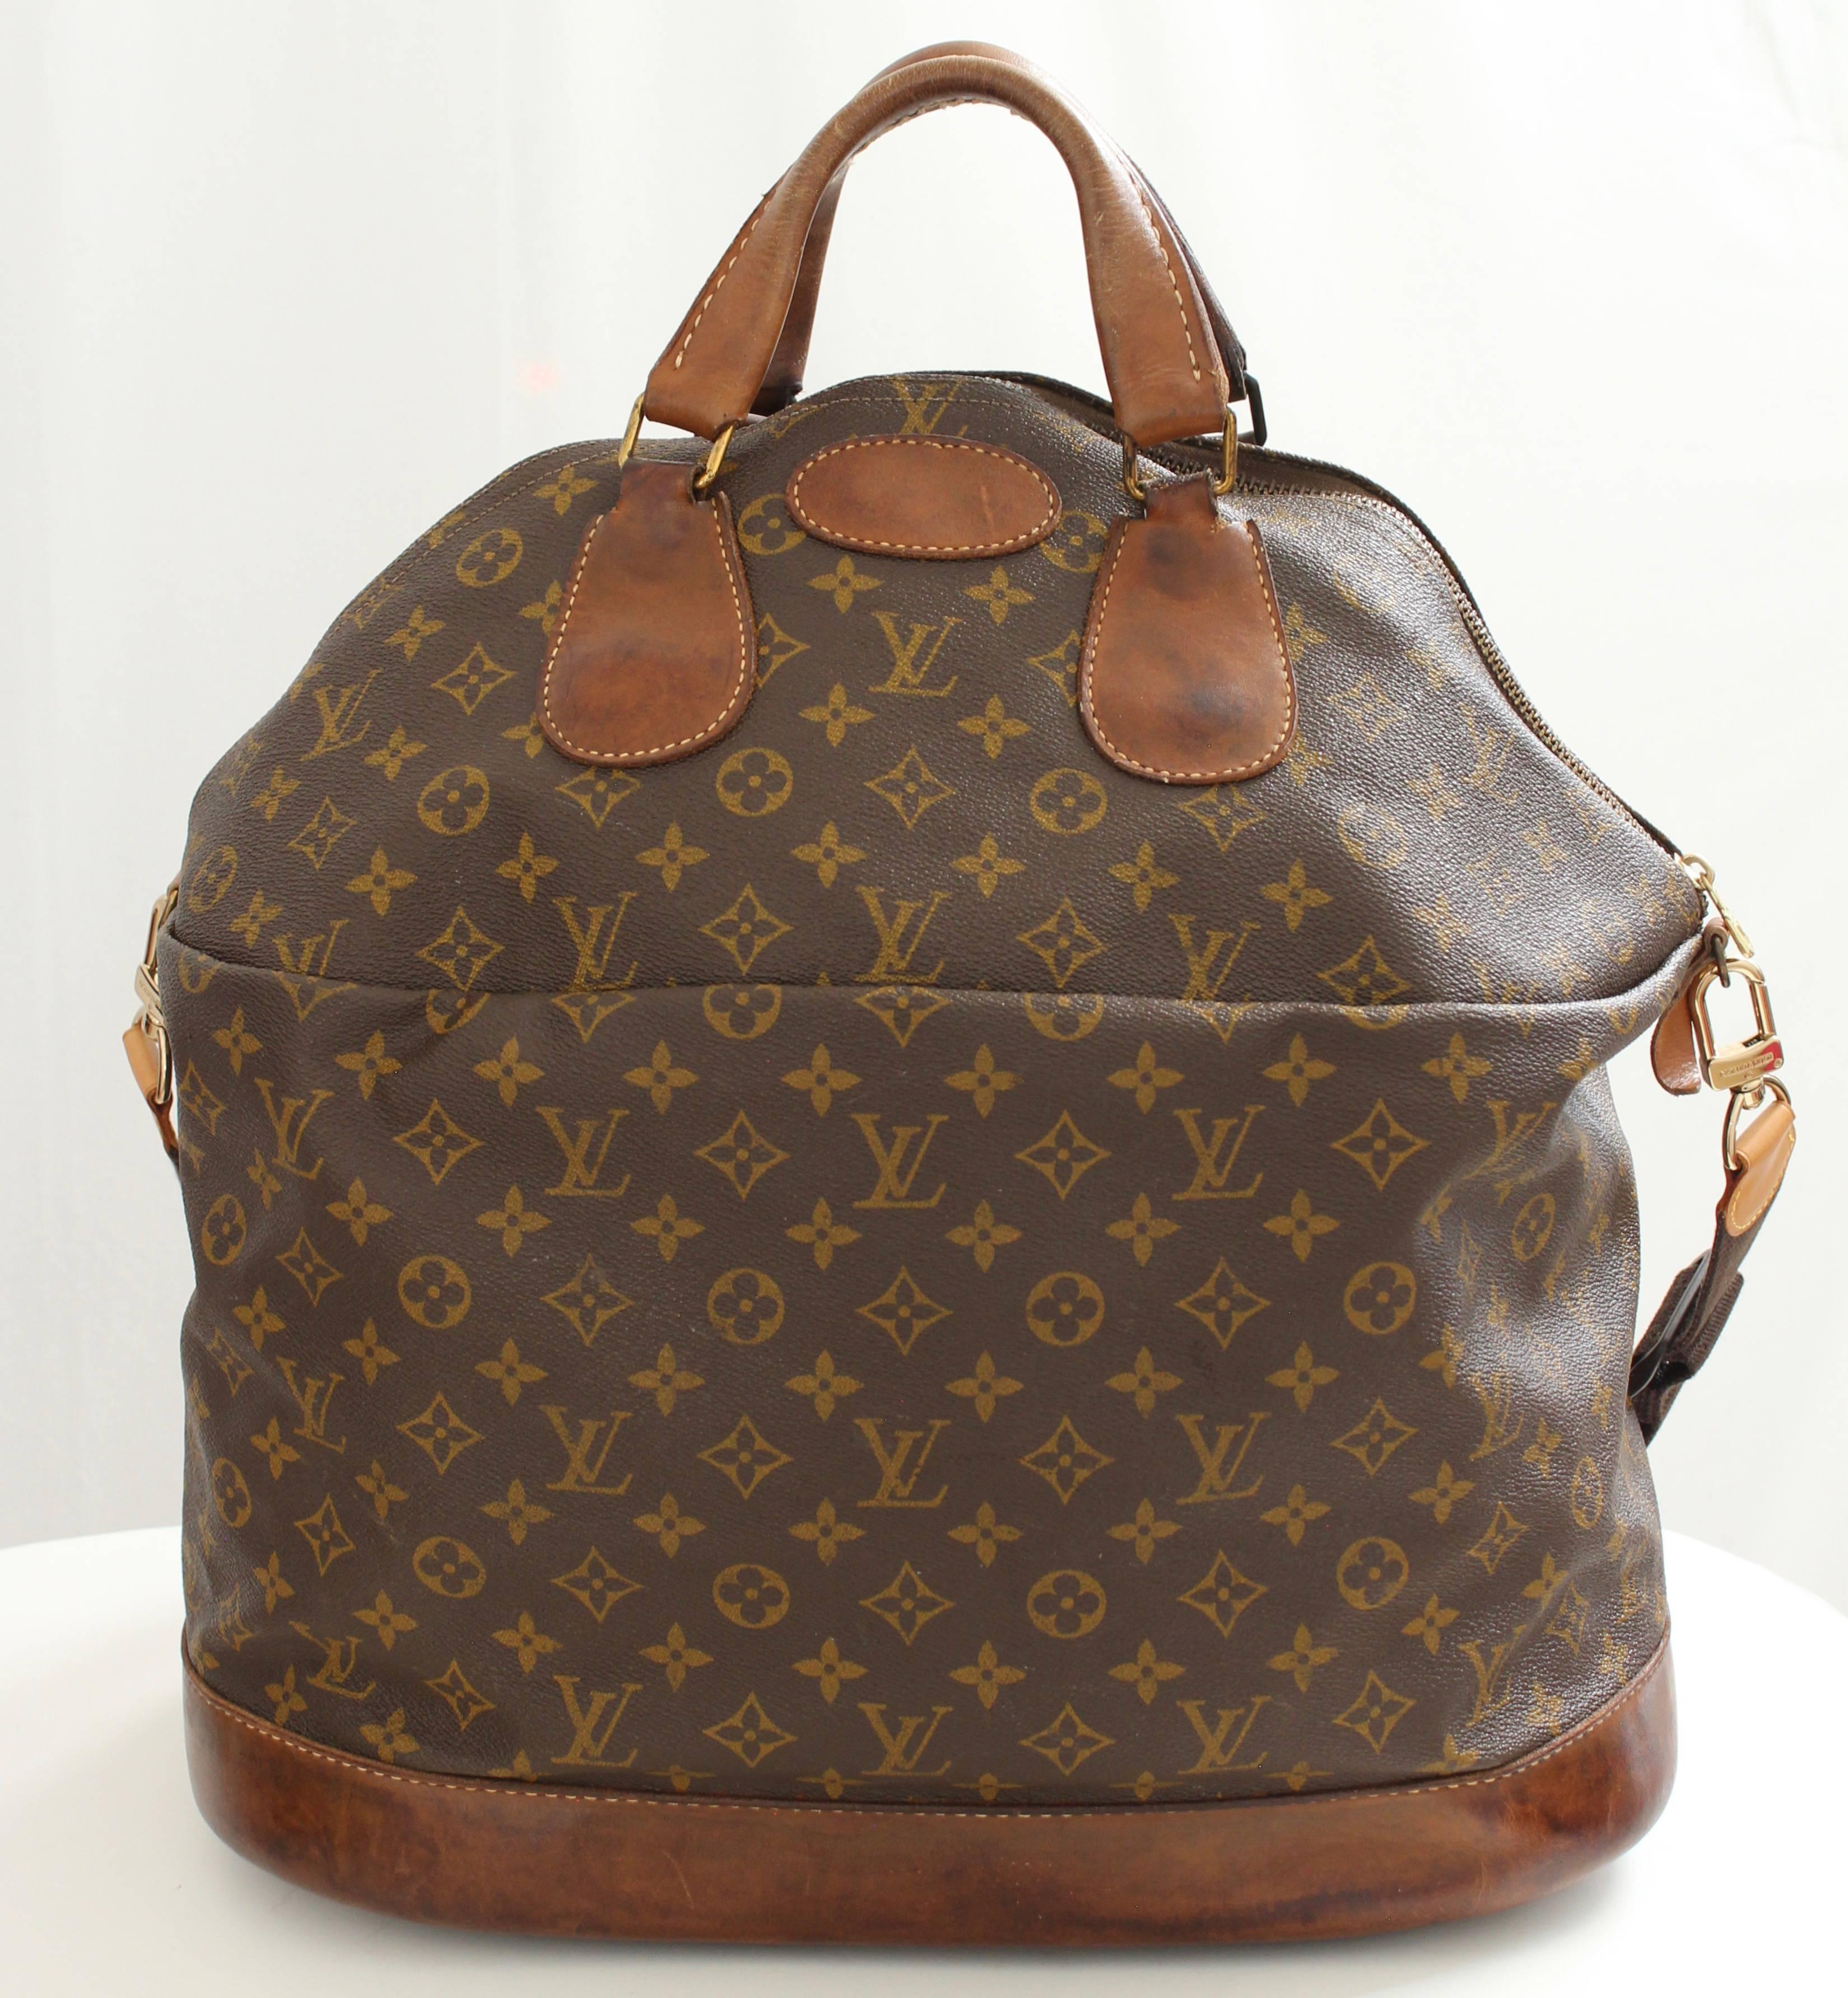 Louis Vuitton Large Steamer Bag Keepall Monogram Travel Tote French Company 70er Jahre 1